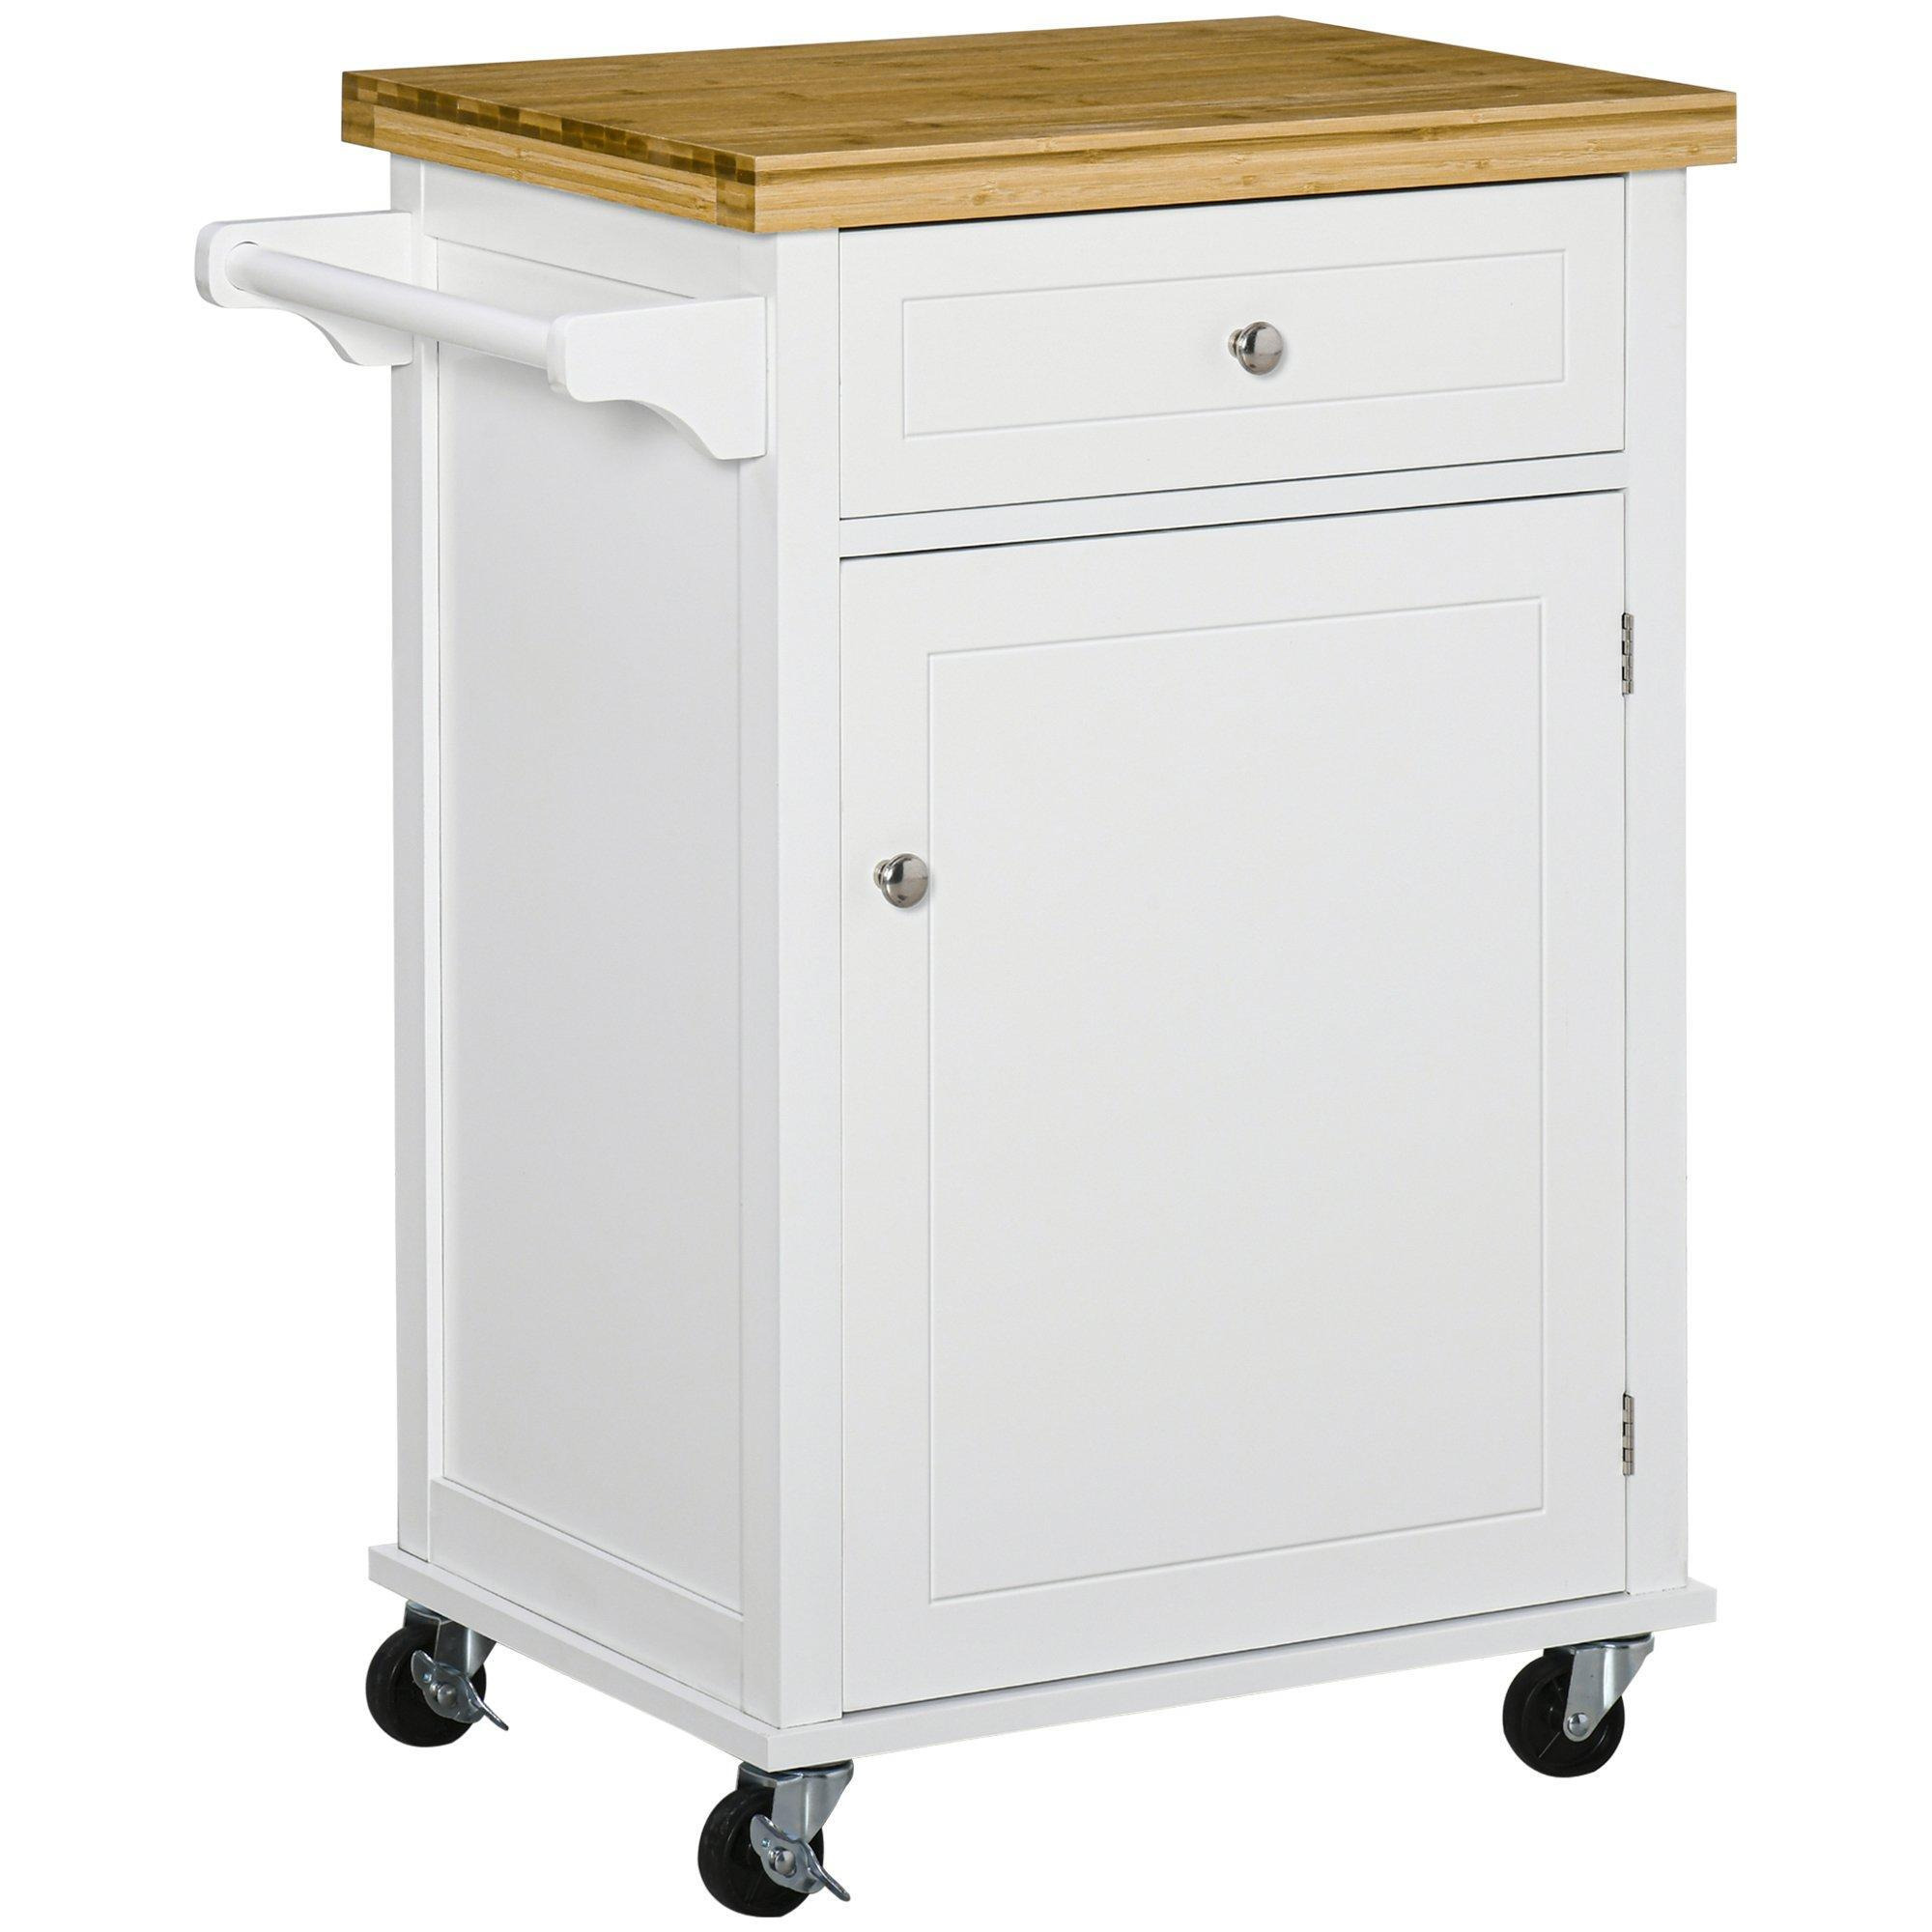 HOMCOM Rolling Kitchen Cart Storage Trolley with Drawer Towel Rail White - image 1